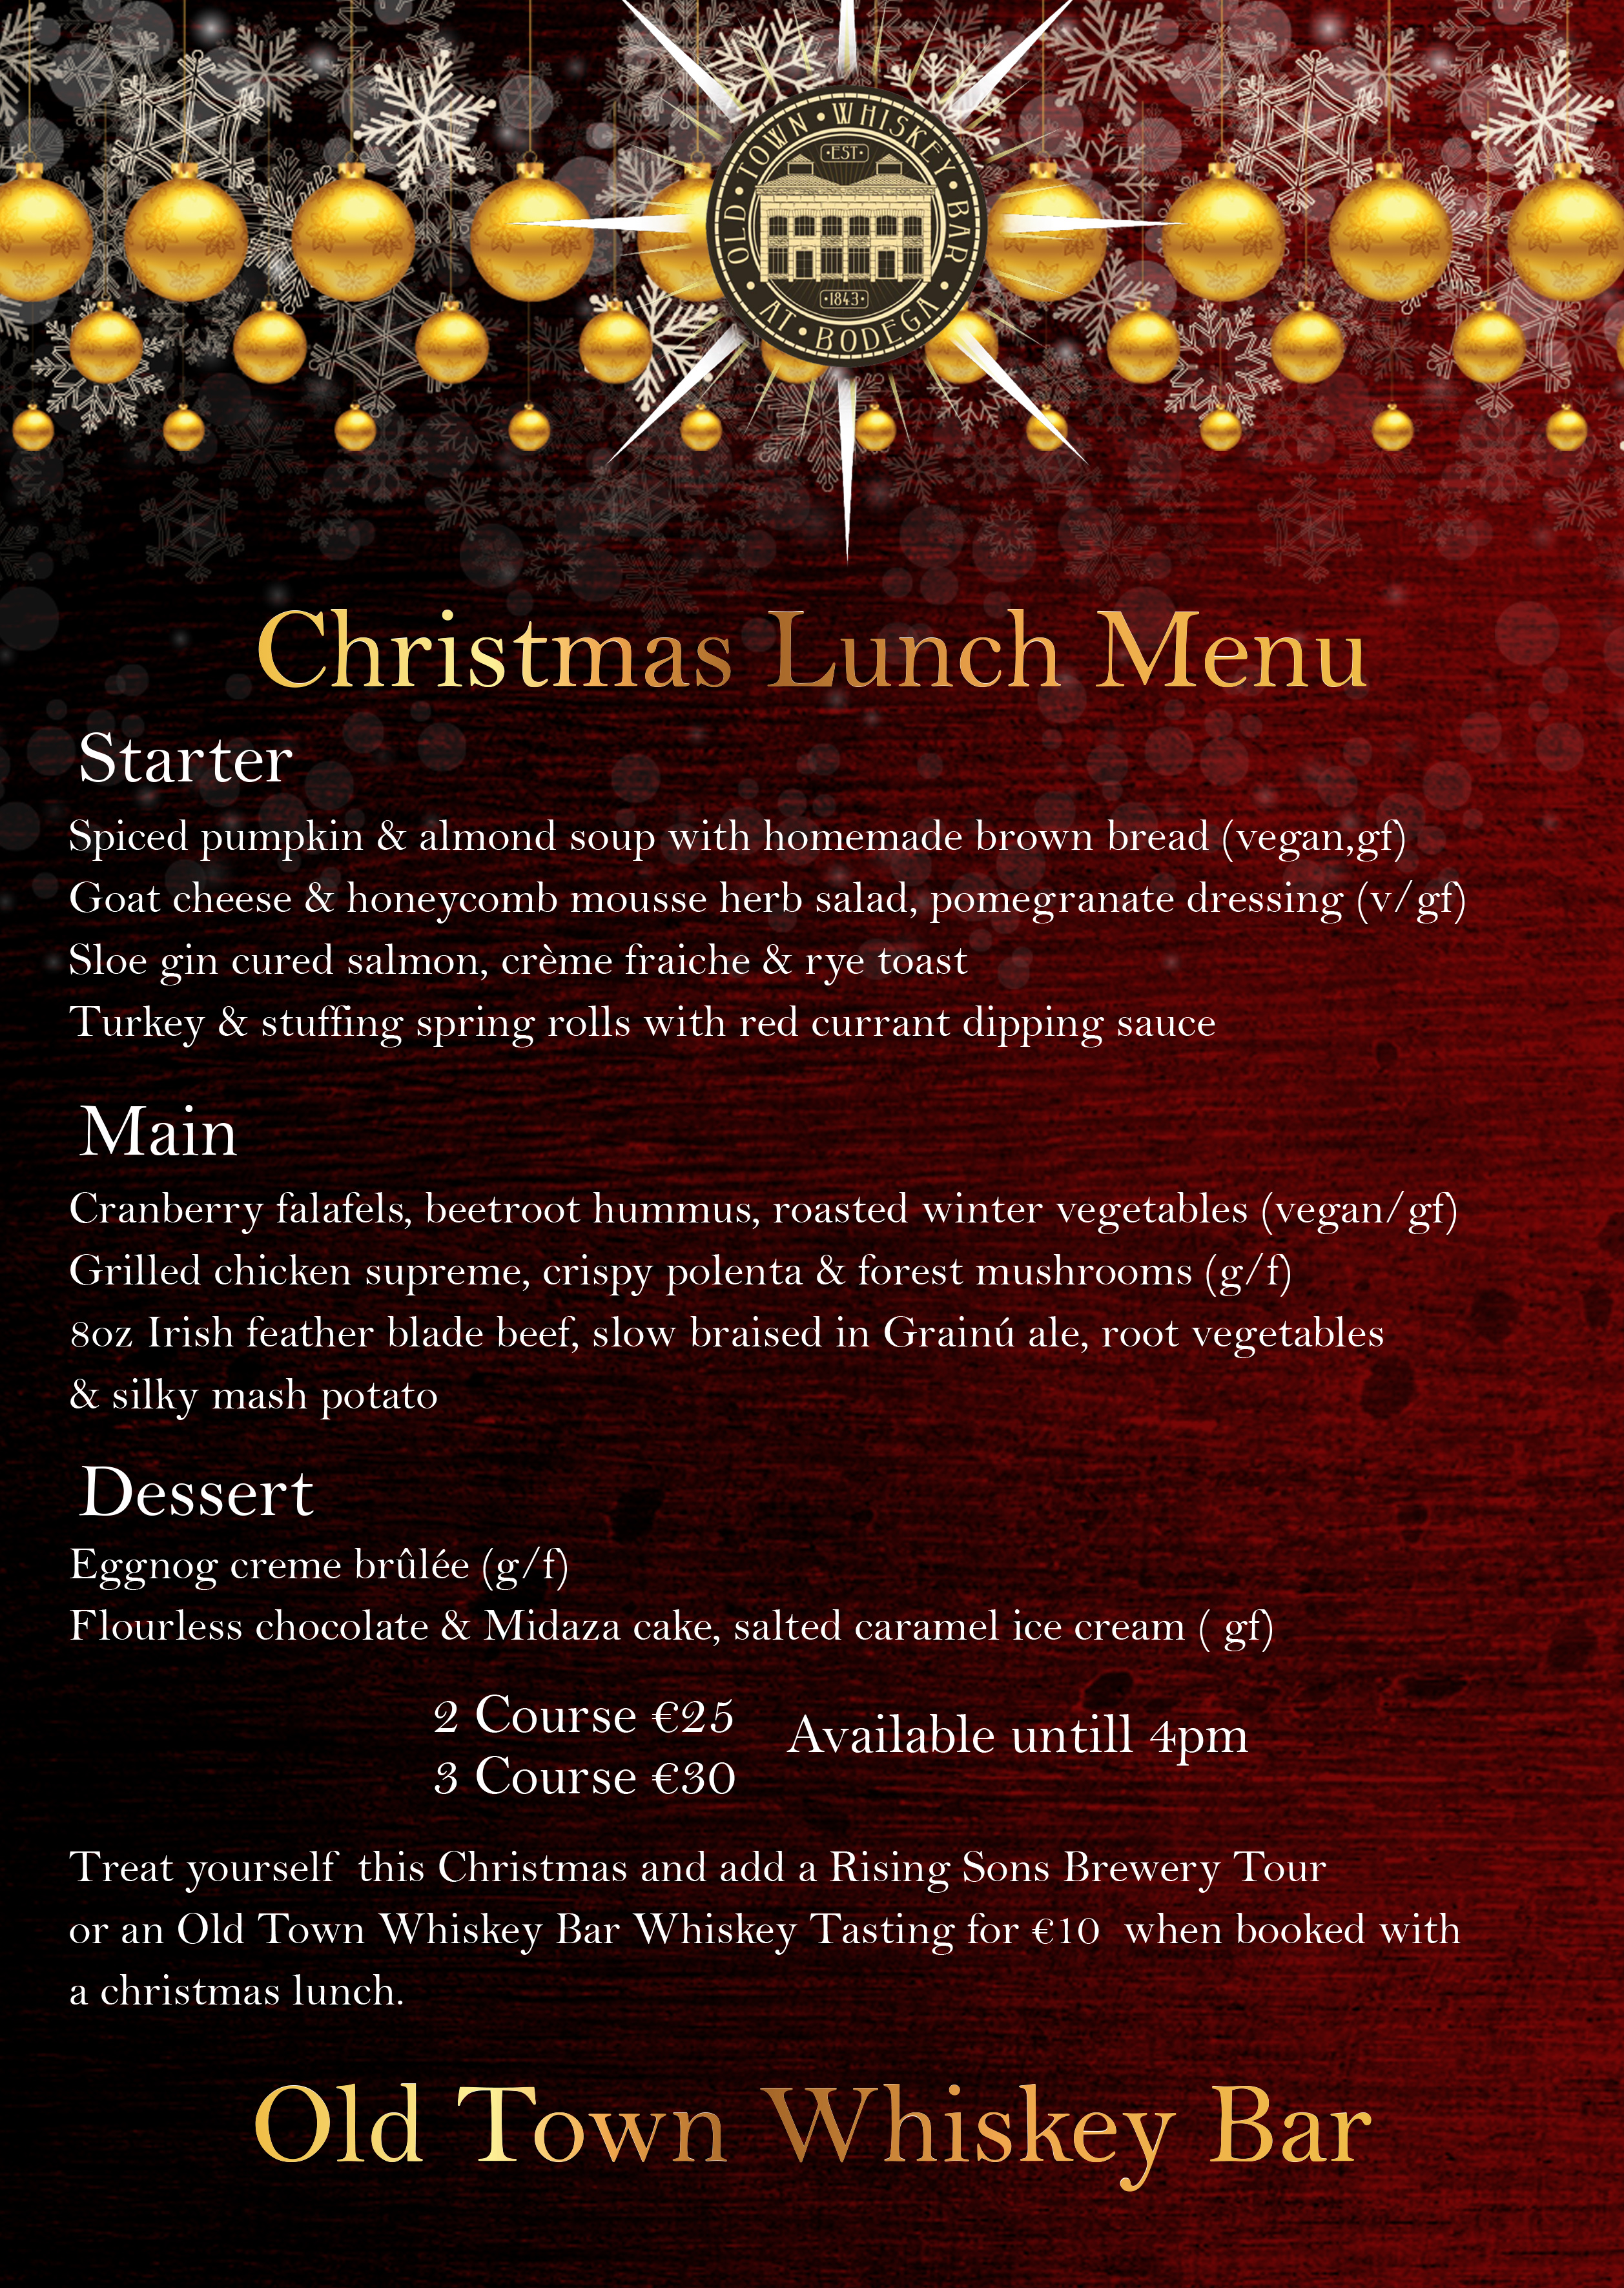 Christmas lunch menu updated Old Town Whiskey Bar